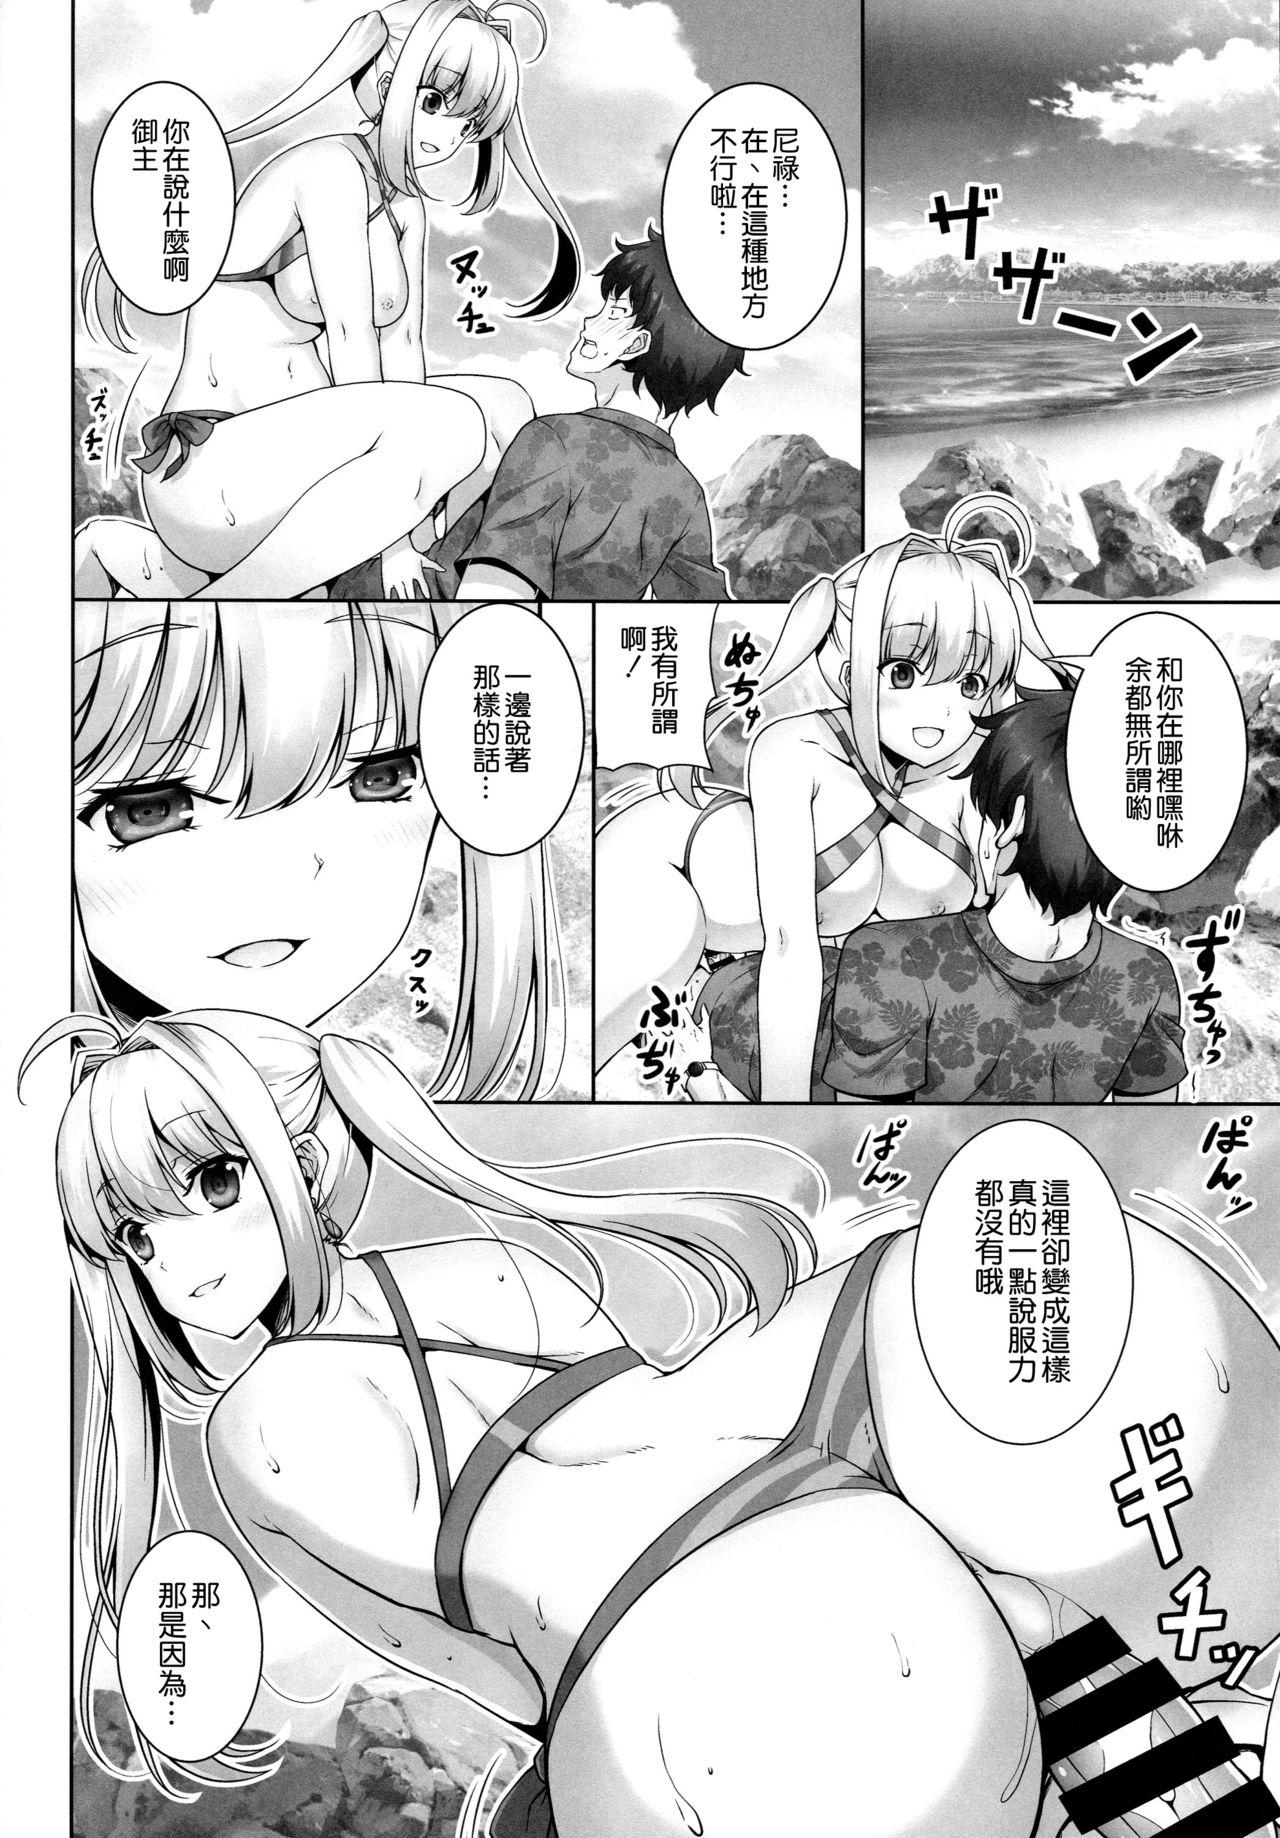 Public Nudity SEX ON THE BEACH!! - Fate grand order Hard Core Sex - Page 6